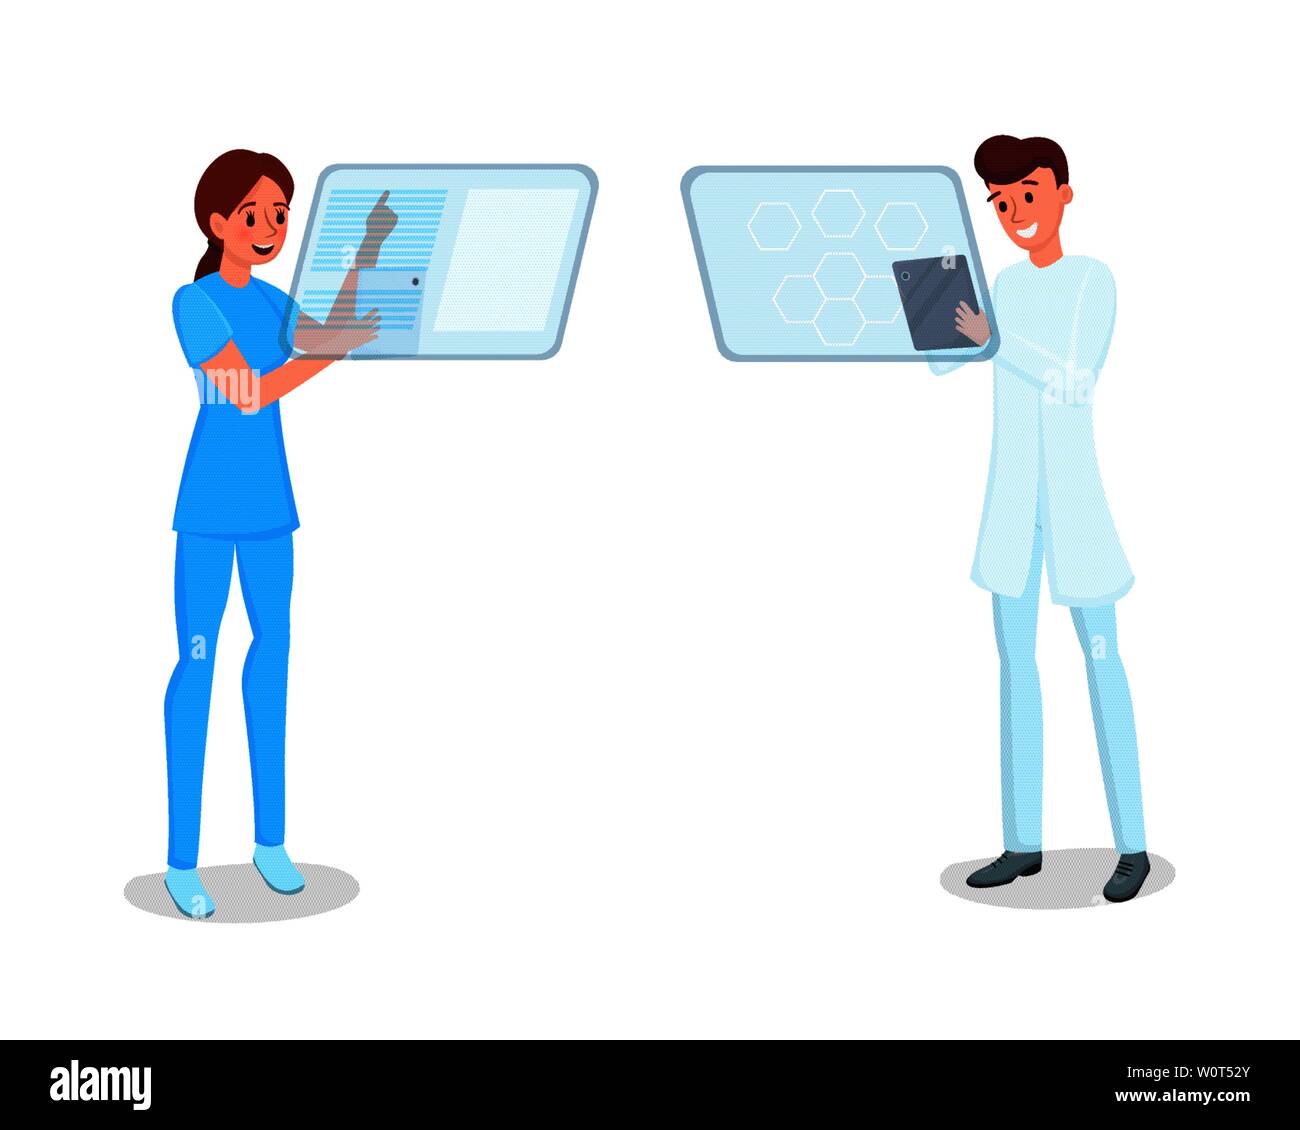 Medical staff with tablets vector illustration. Young nurse and physician with futuristic gadgets cartoon characters. Innovative technologies in medicine, doctors working with interactive displays Stock Vector